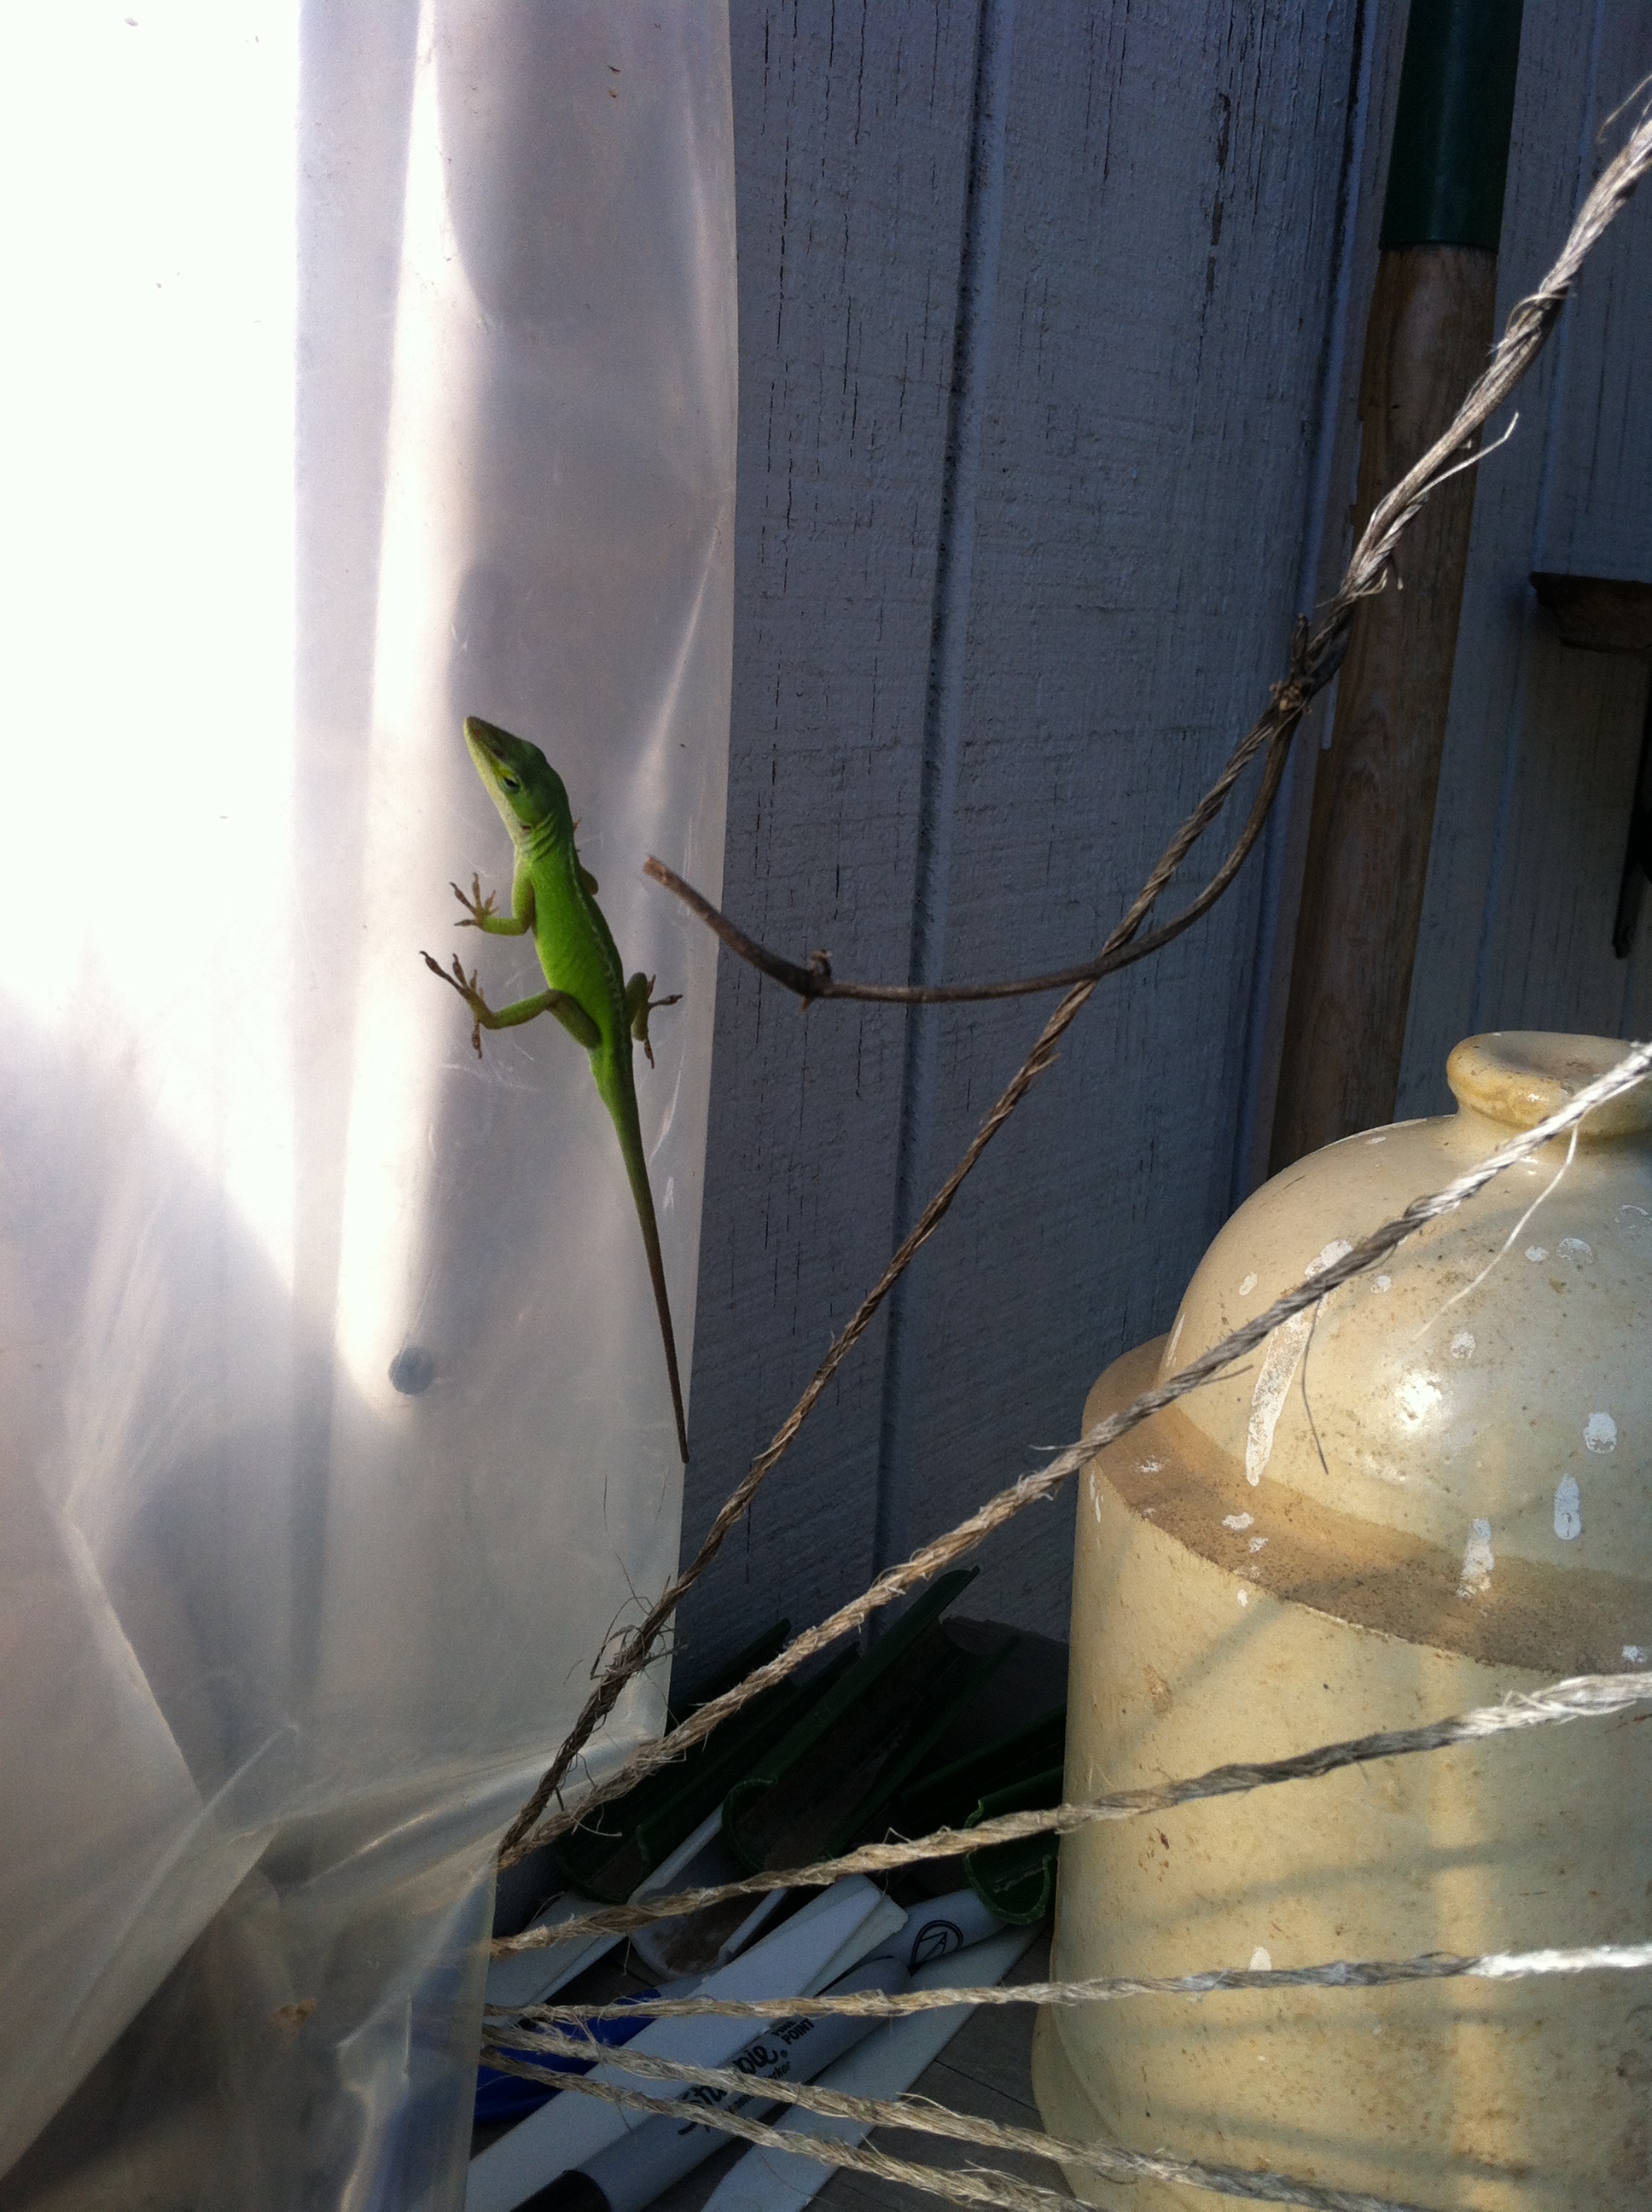 Male Anole lizard. Reptiles and amphibians are a welcome sight in the garden. Lizards, frogs and toads will help rid your garden of pest bugs. 